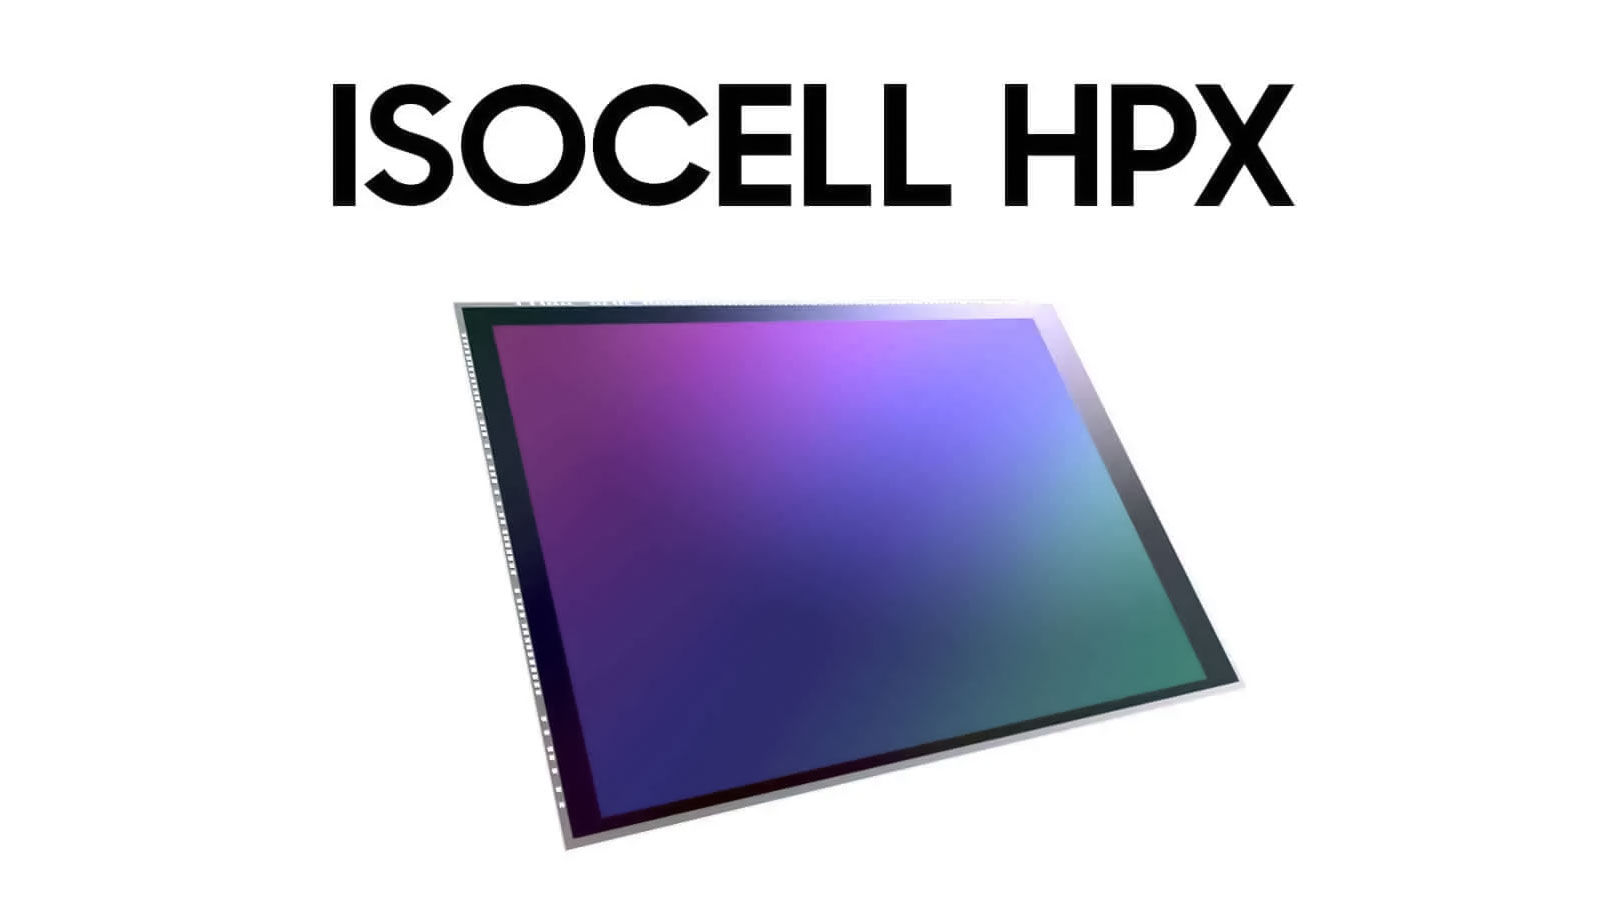 ISOCELL HPX